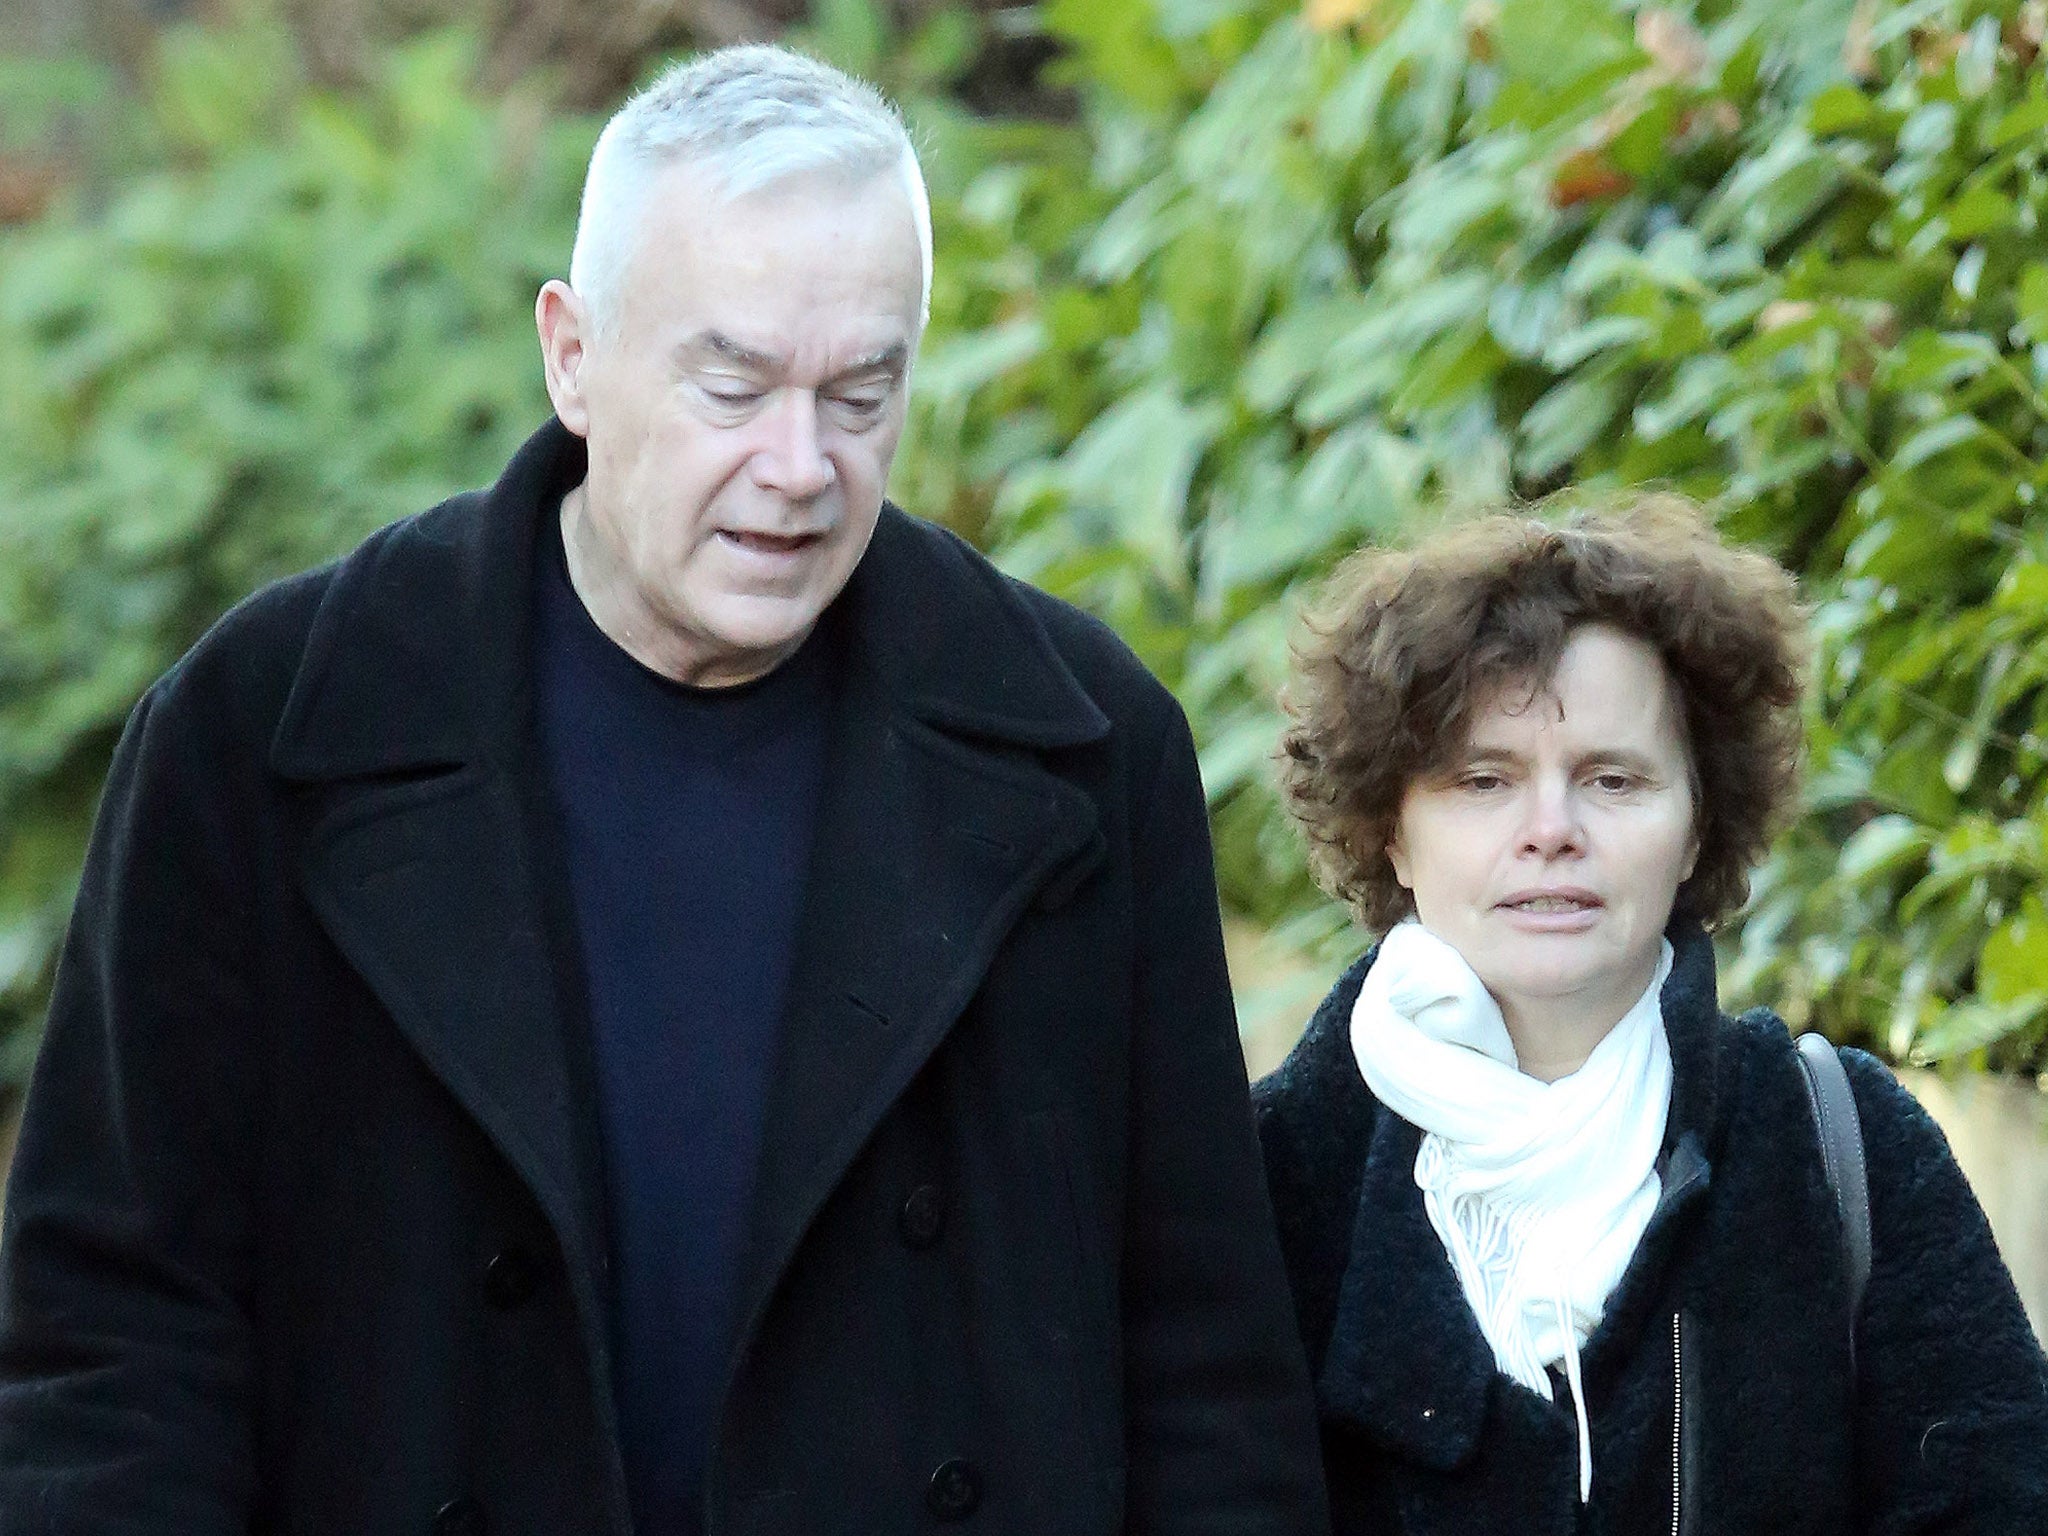 Huw Edwards in hospital as he is named in BBC sex scandal The Independent image pic